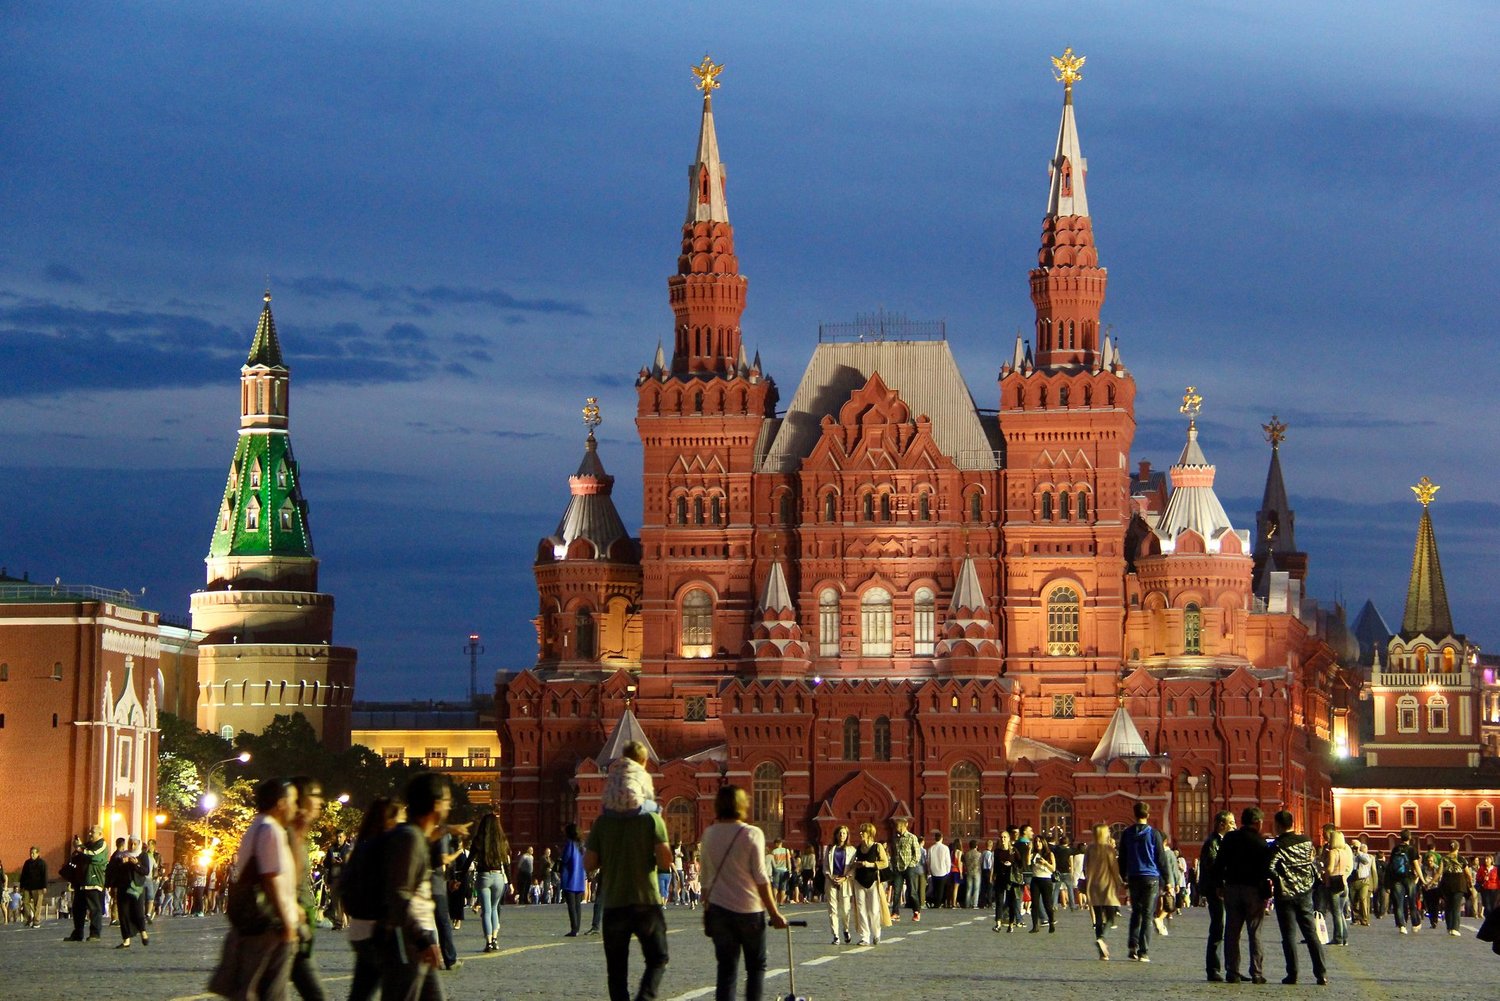 <span style="font-weight: bold;">Moscow Facts &amp; Routes</span><br>